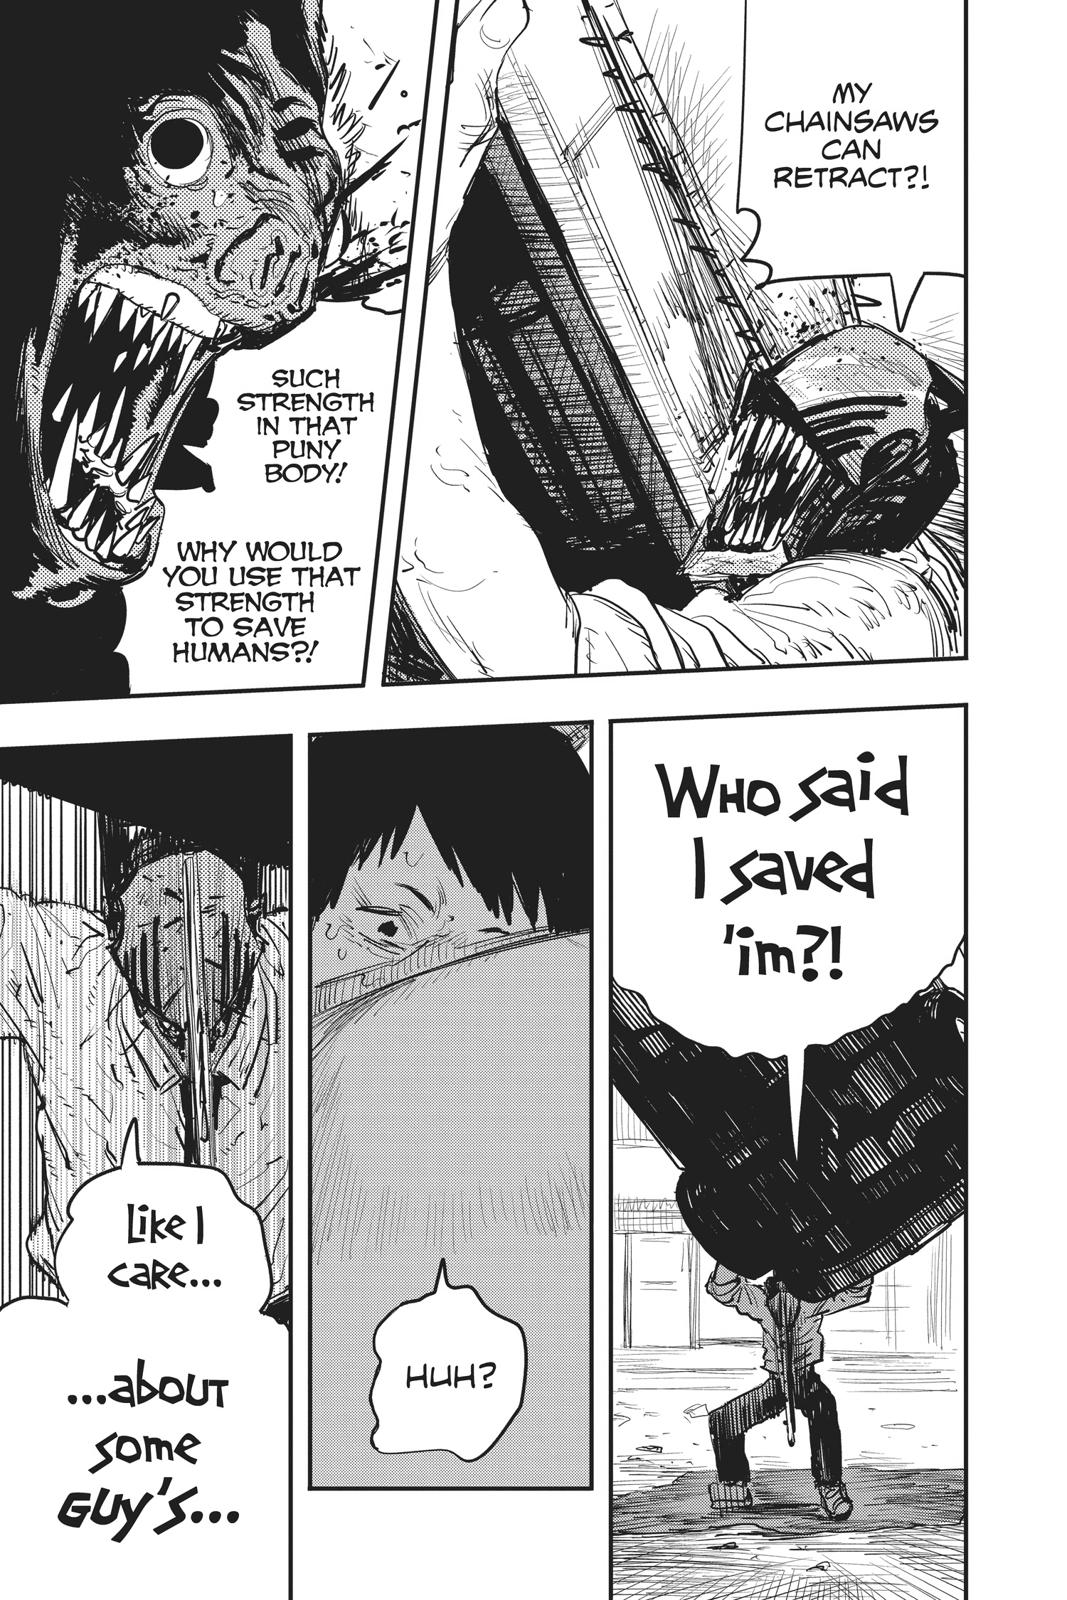 Chainsaw Man - Page 8 of 9